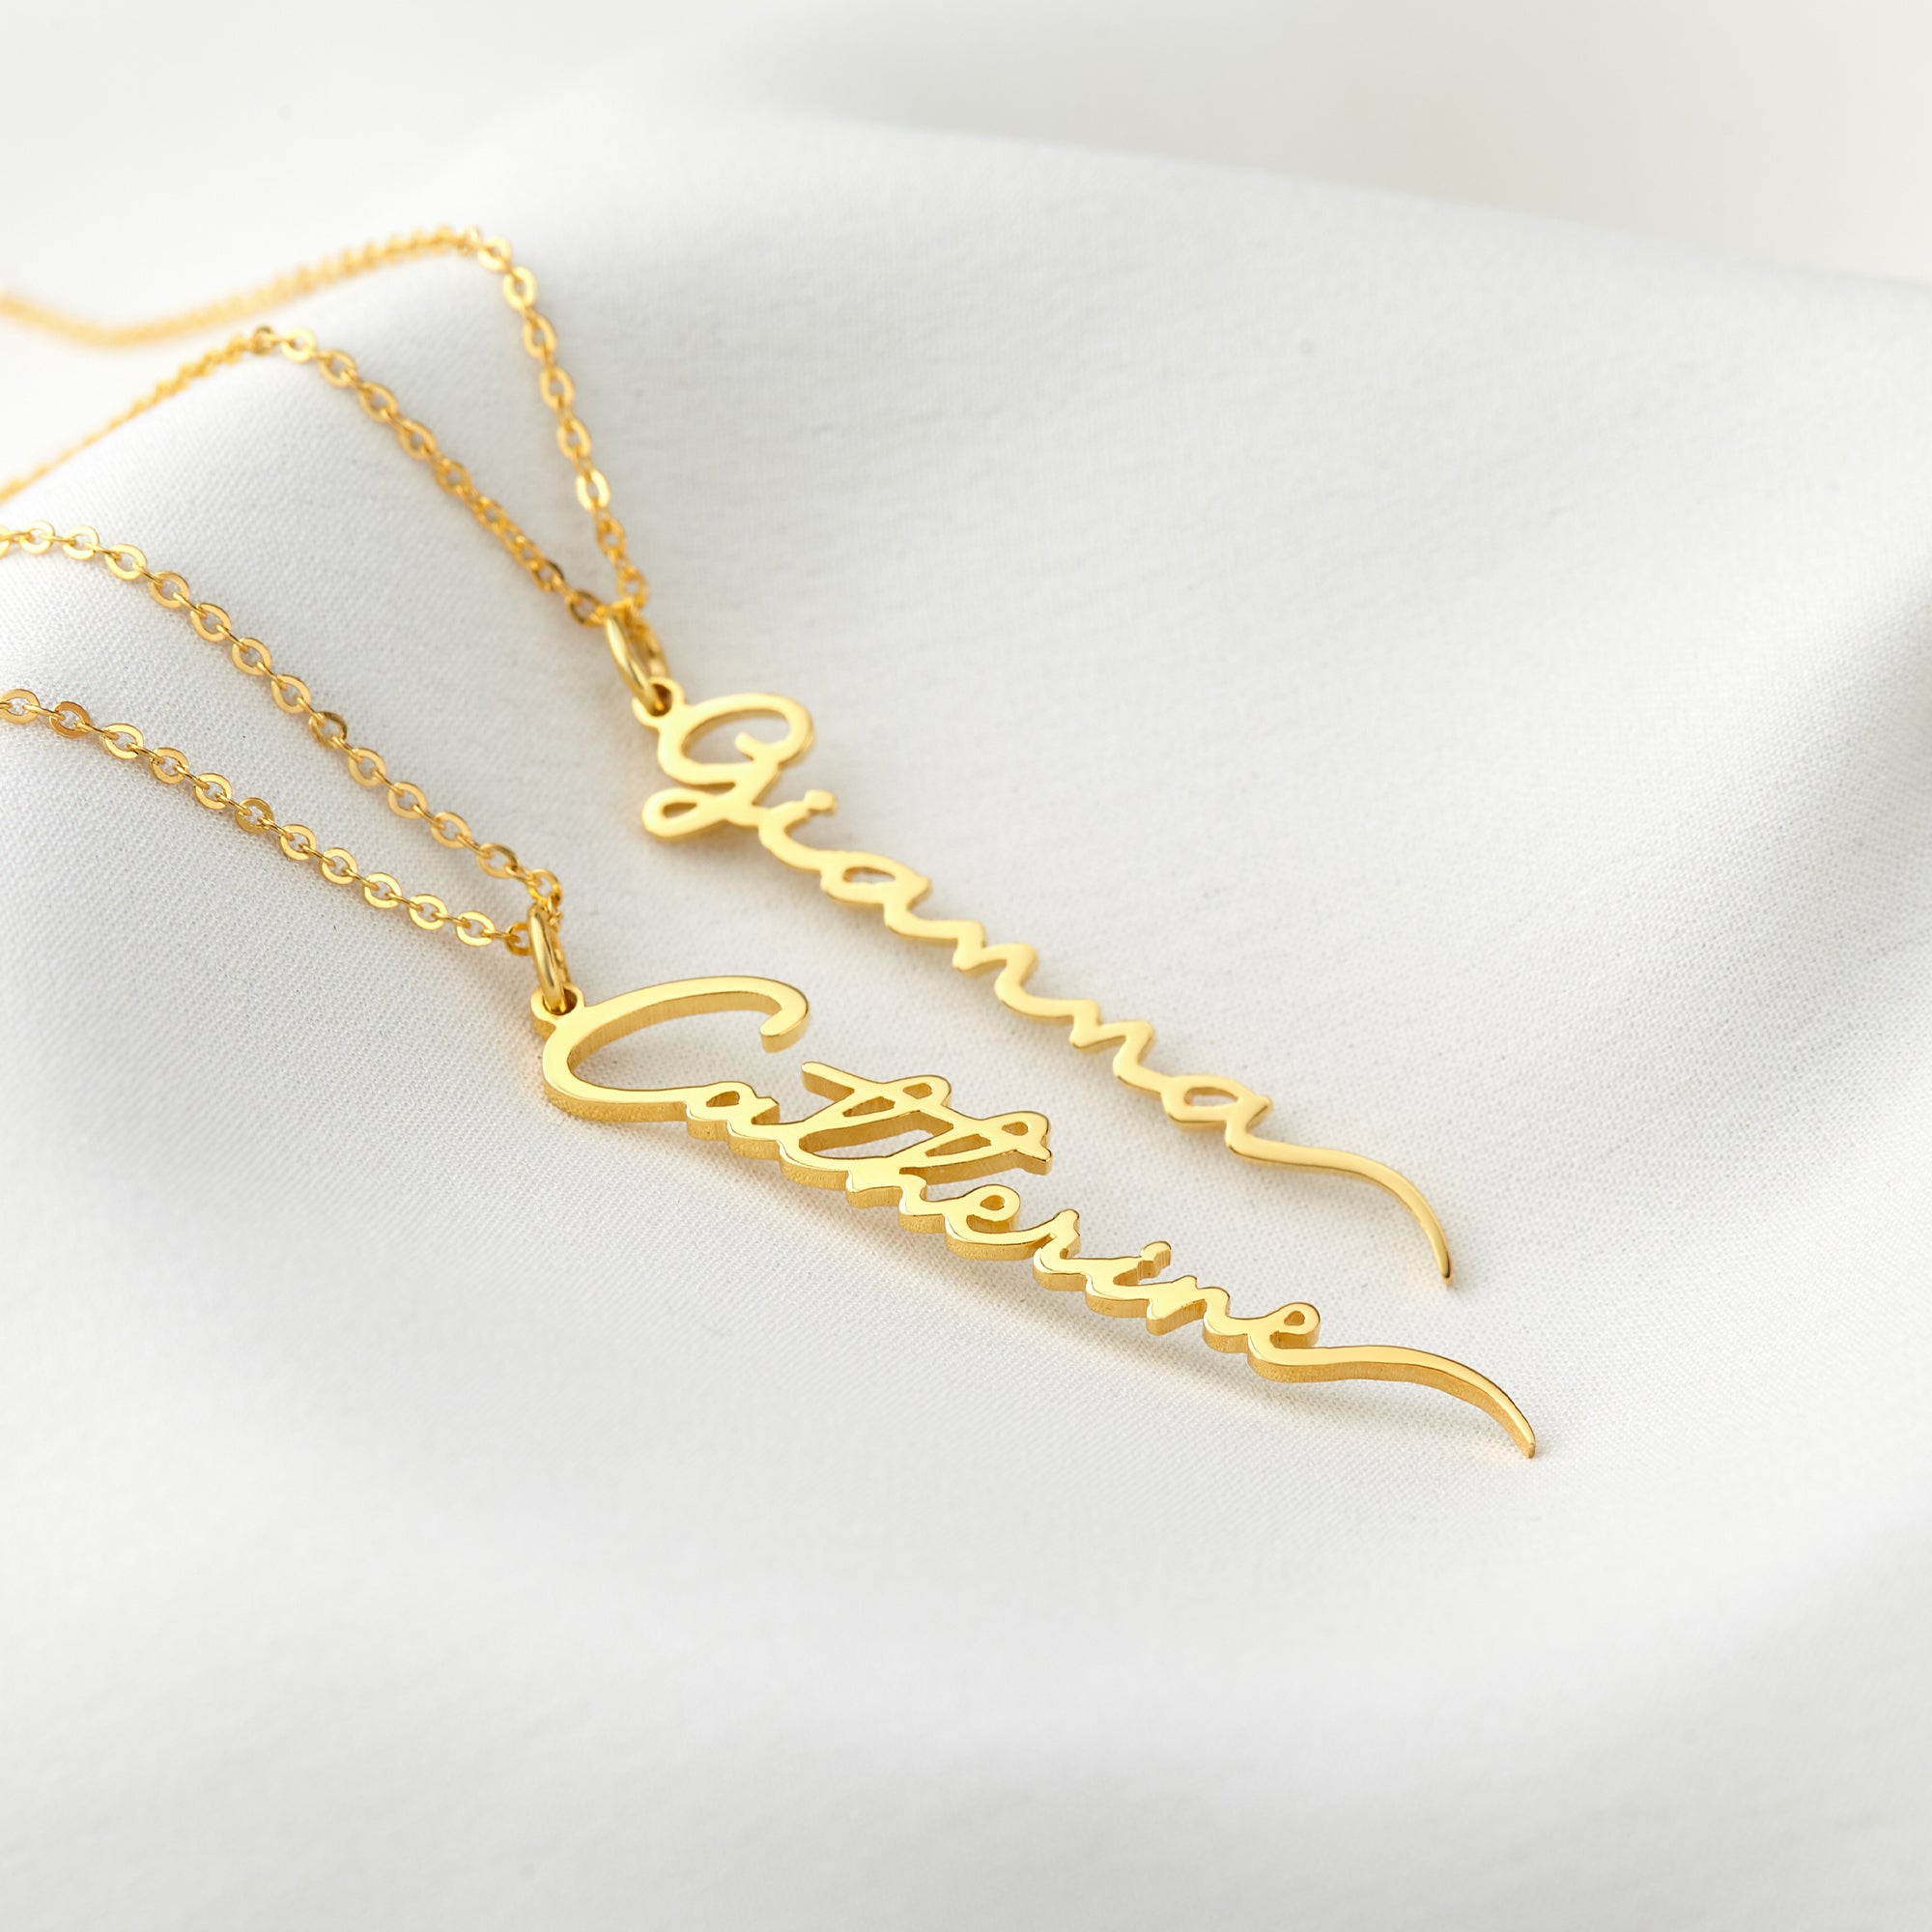 Personalized Name Necklace - Handwriting Font, Sterling Silver, Gold Plated - Gifts for Teen Girls, Daughters, Nieces - Necklaces - Bijou Her -  -  - 